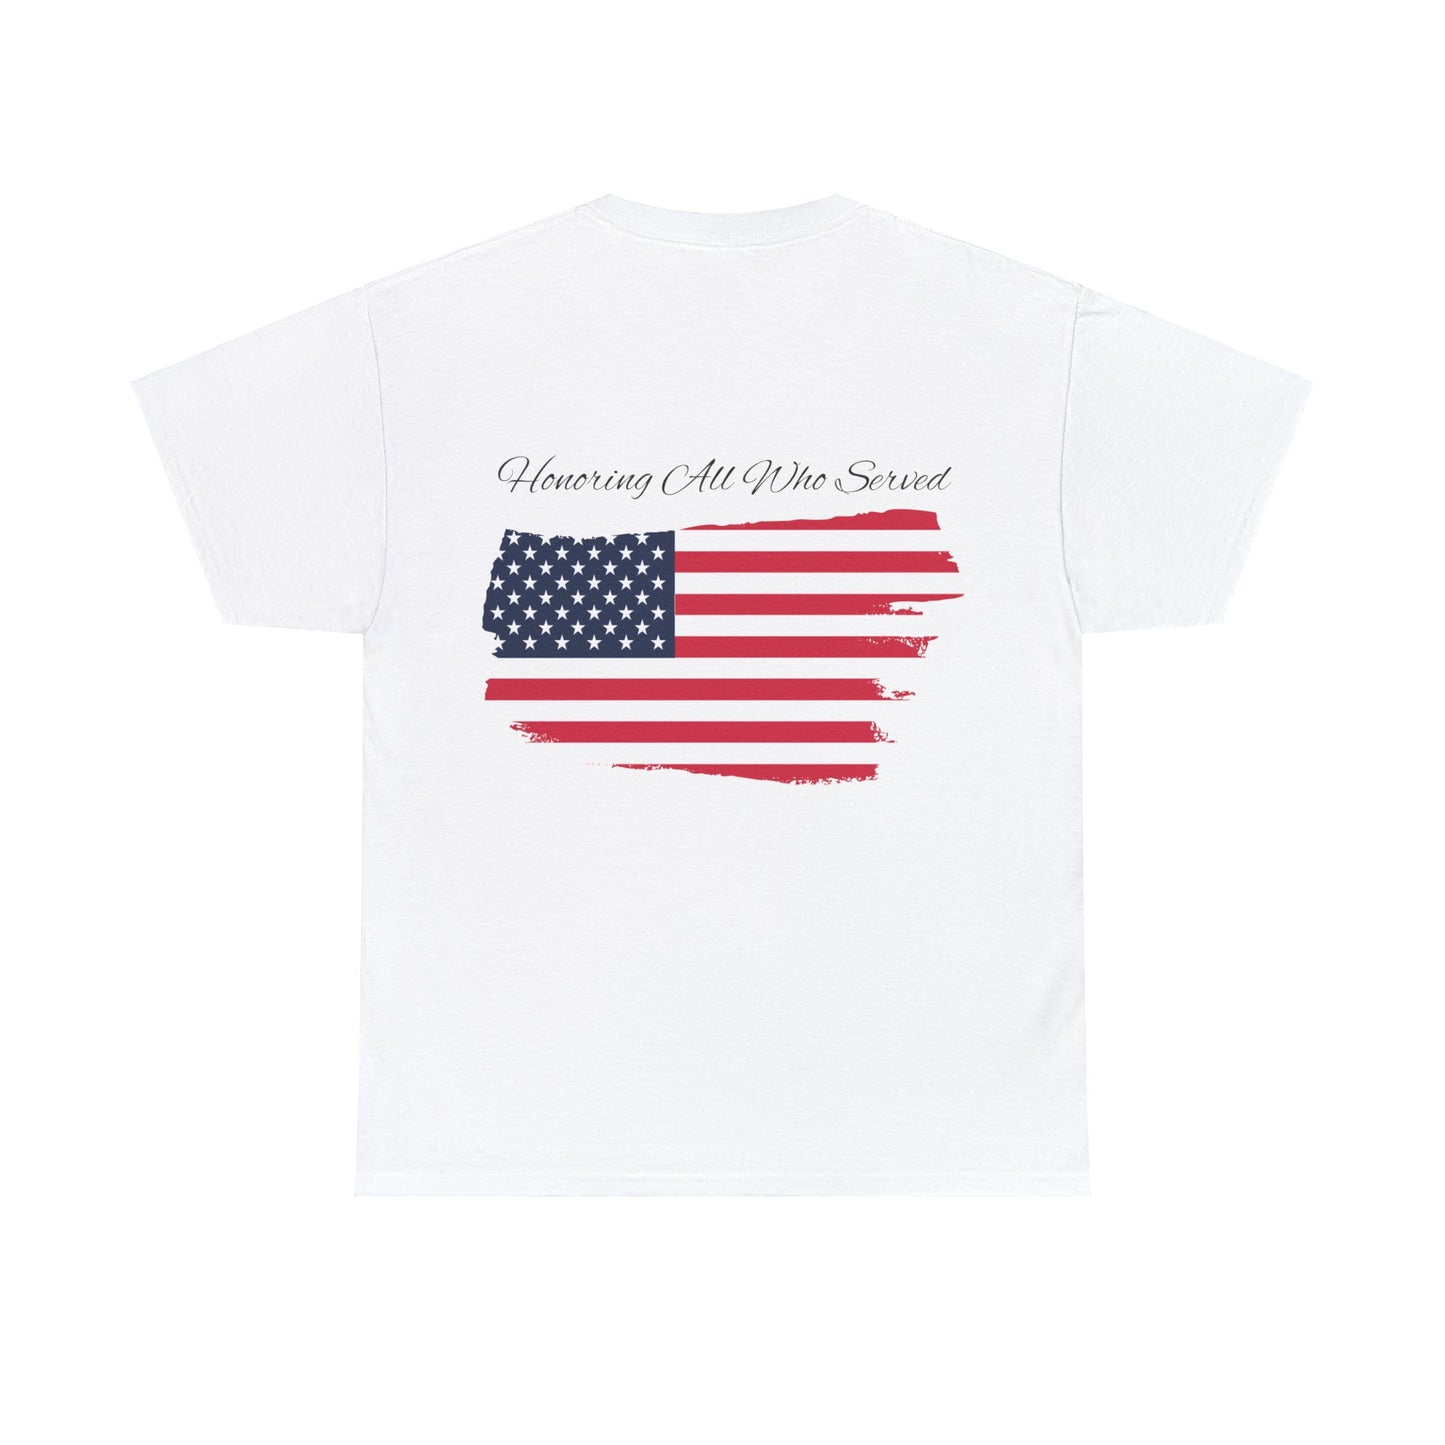 Unisex cotton tee with 'Honoring All Who Served' print for veterans tribute18